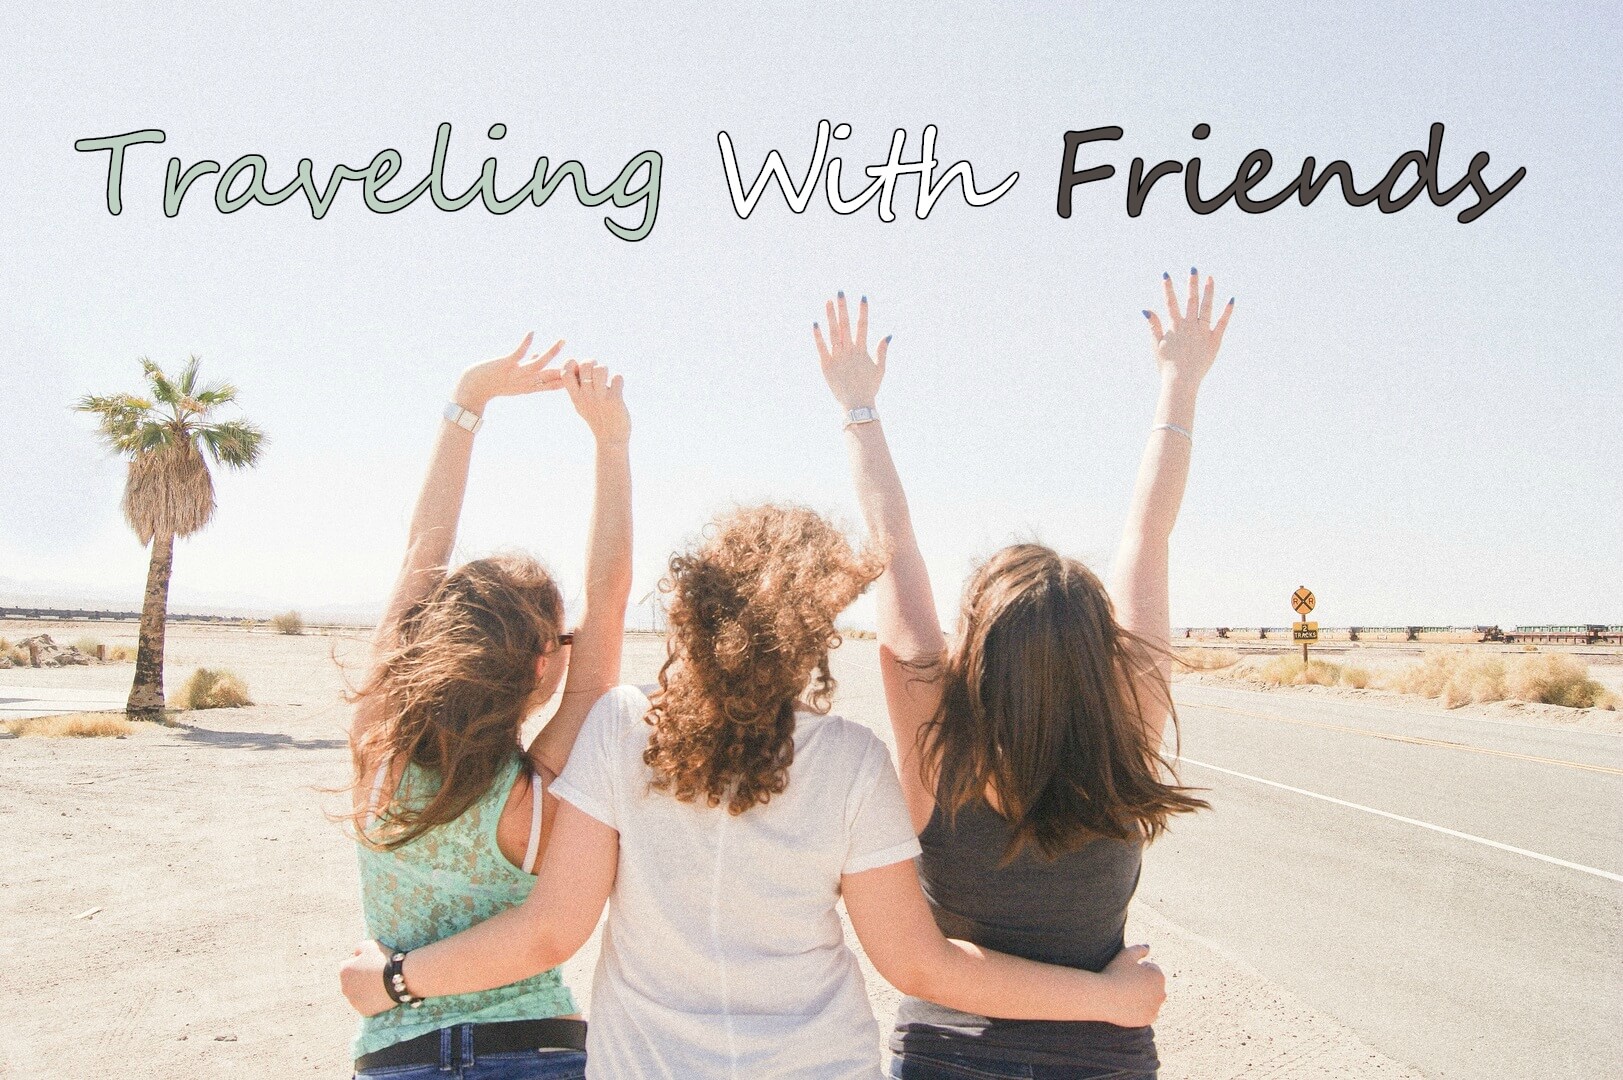 Traveling with Friends is Good: The Benefits of Exploring the World Together